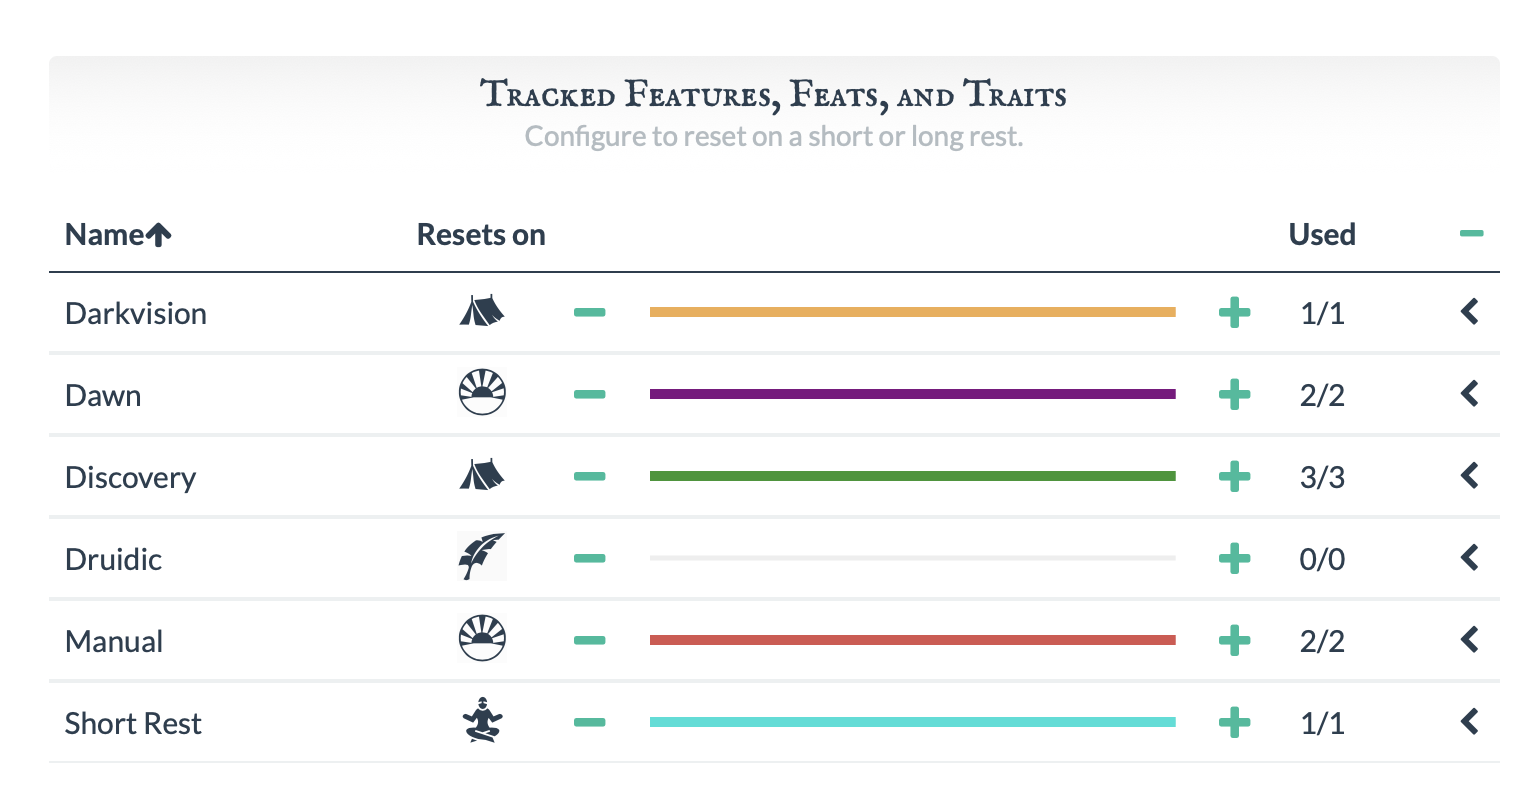 Features, Feats, and Traits Tracker